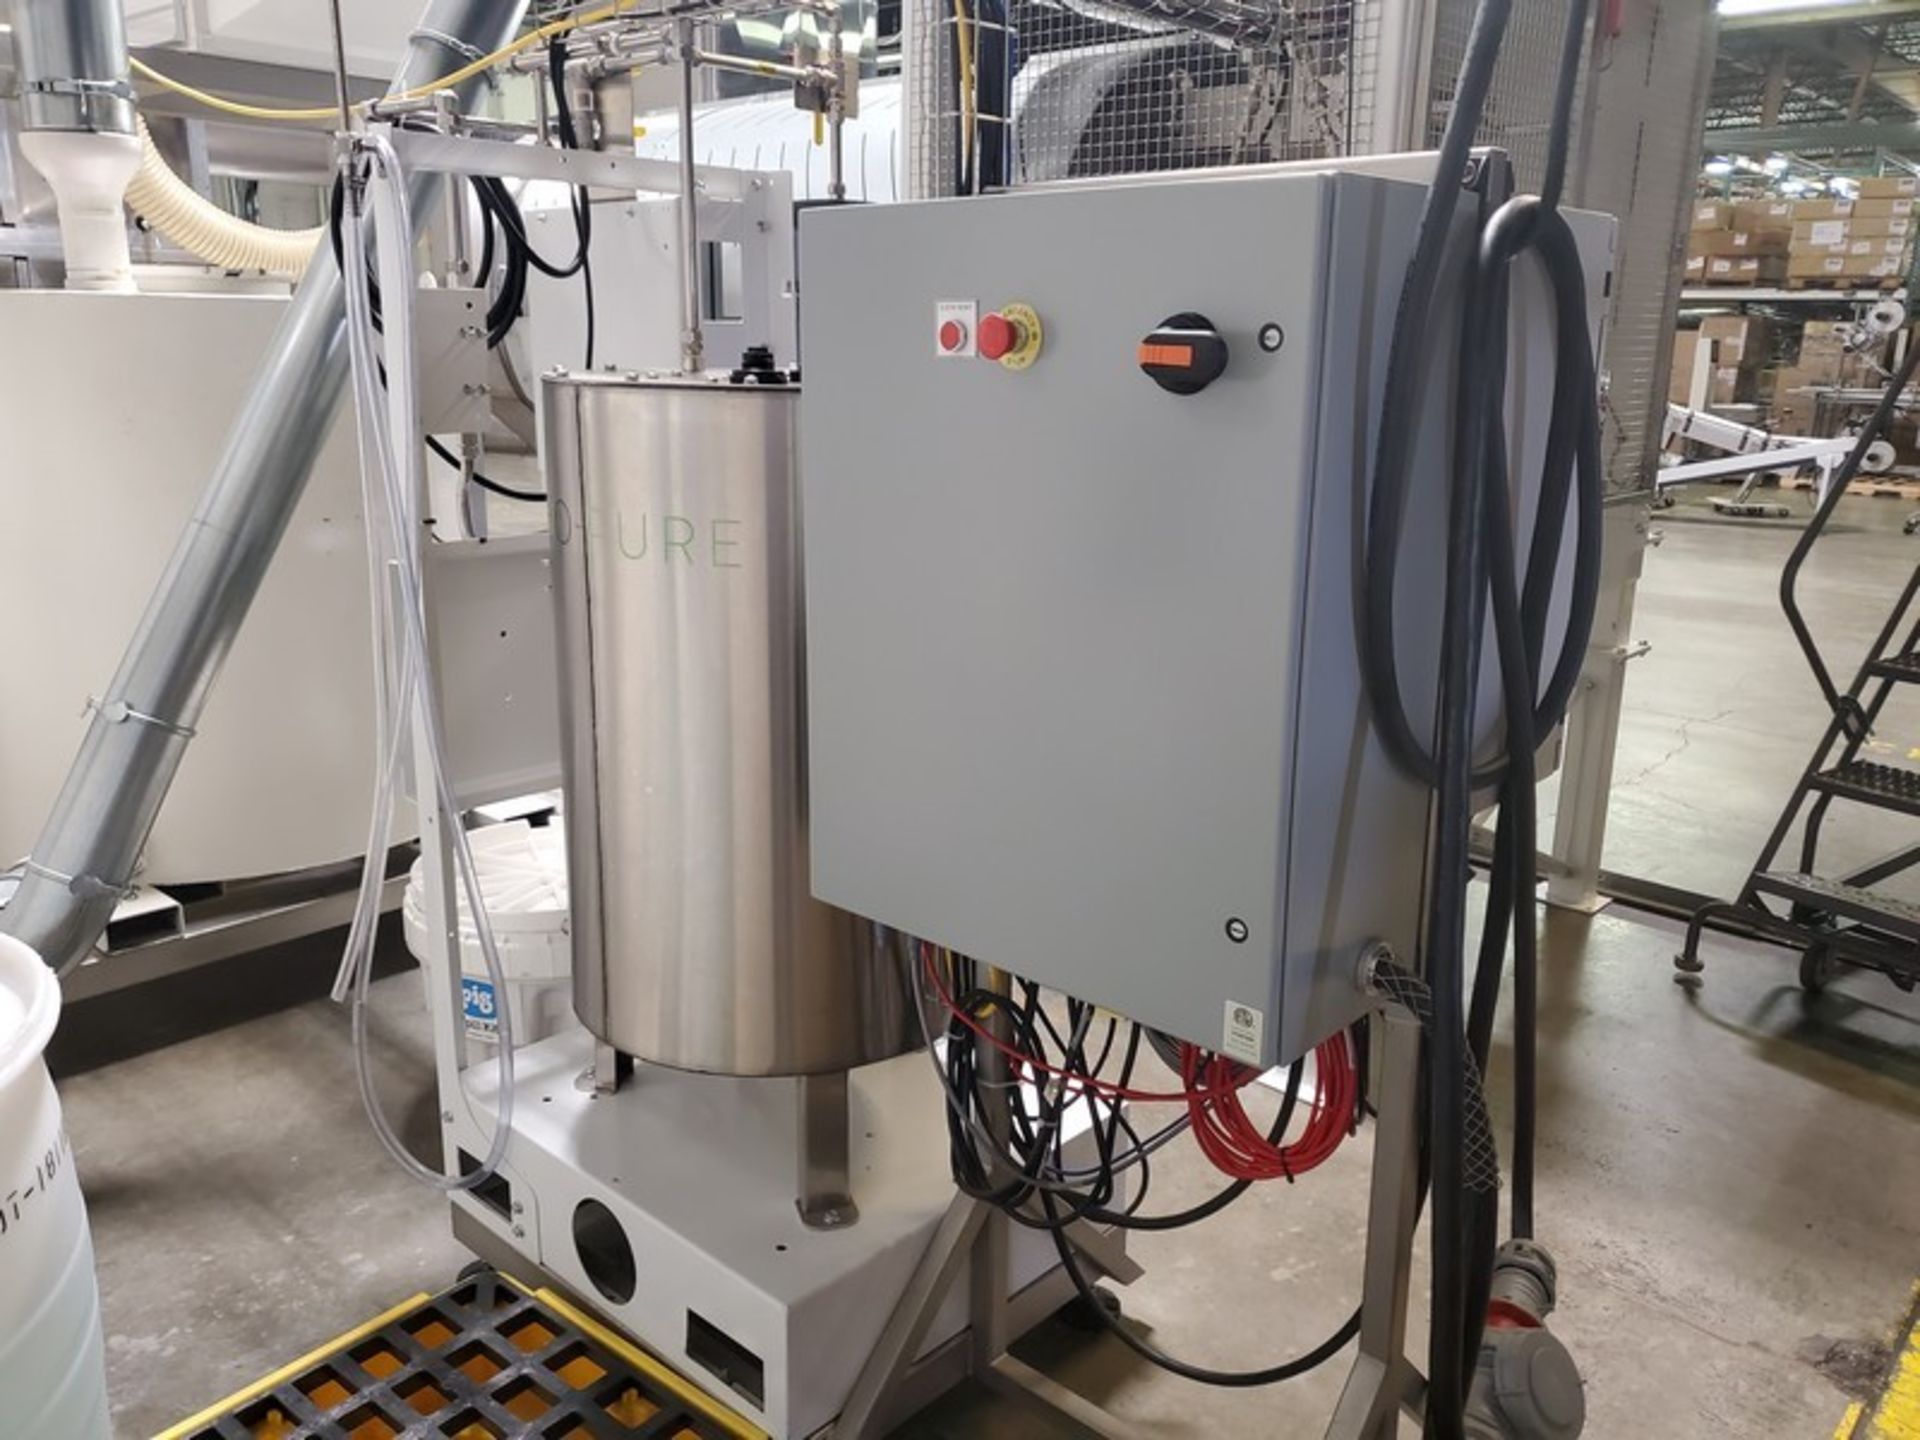 2018 Neo-Pure Seed, Nut, Grain & Hemp Pasteurizing and Drying System, - Image 15 of 108